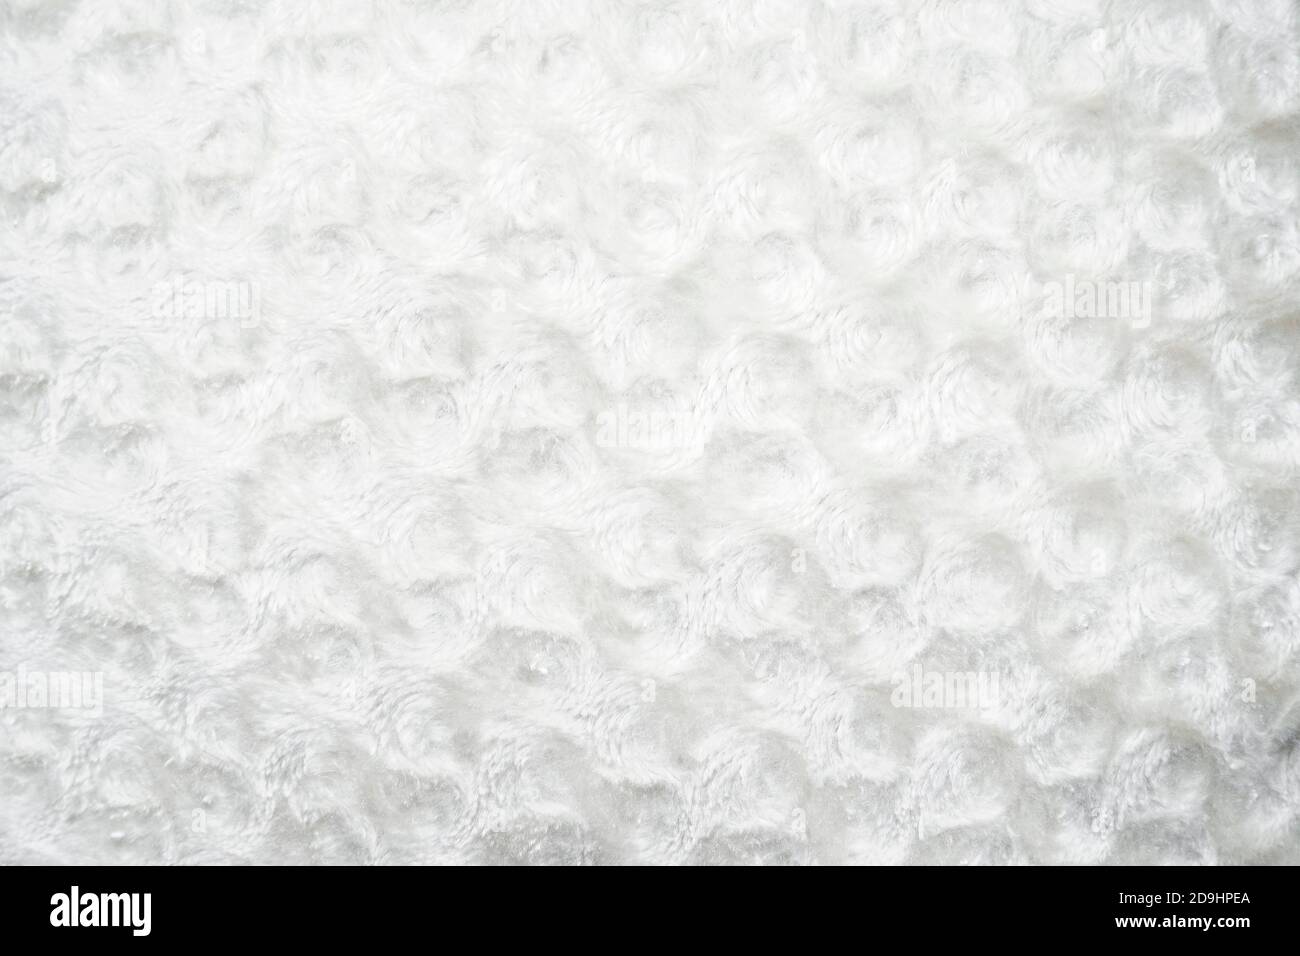 abstract white background of fleecy fabric with circles Stock Photo